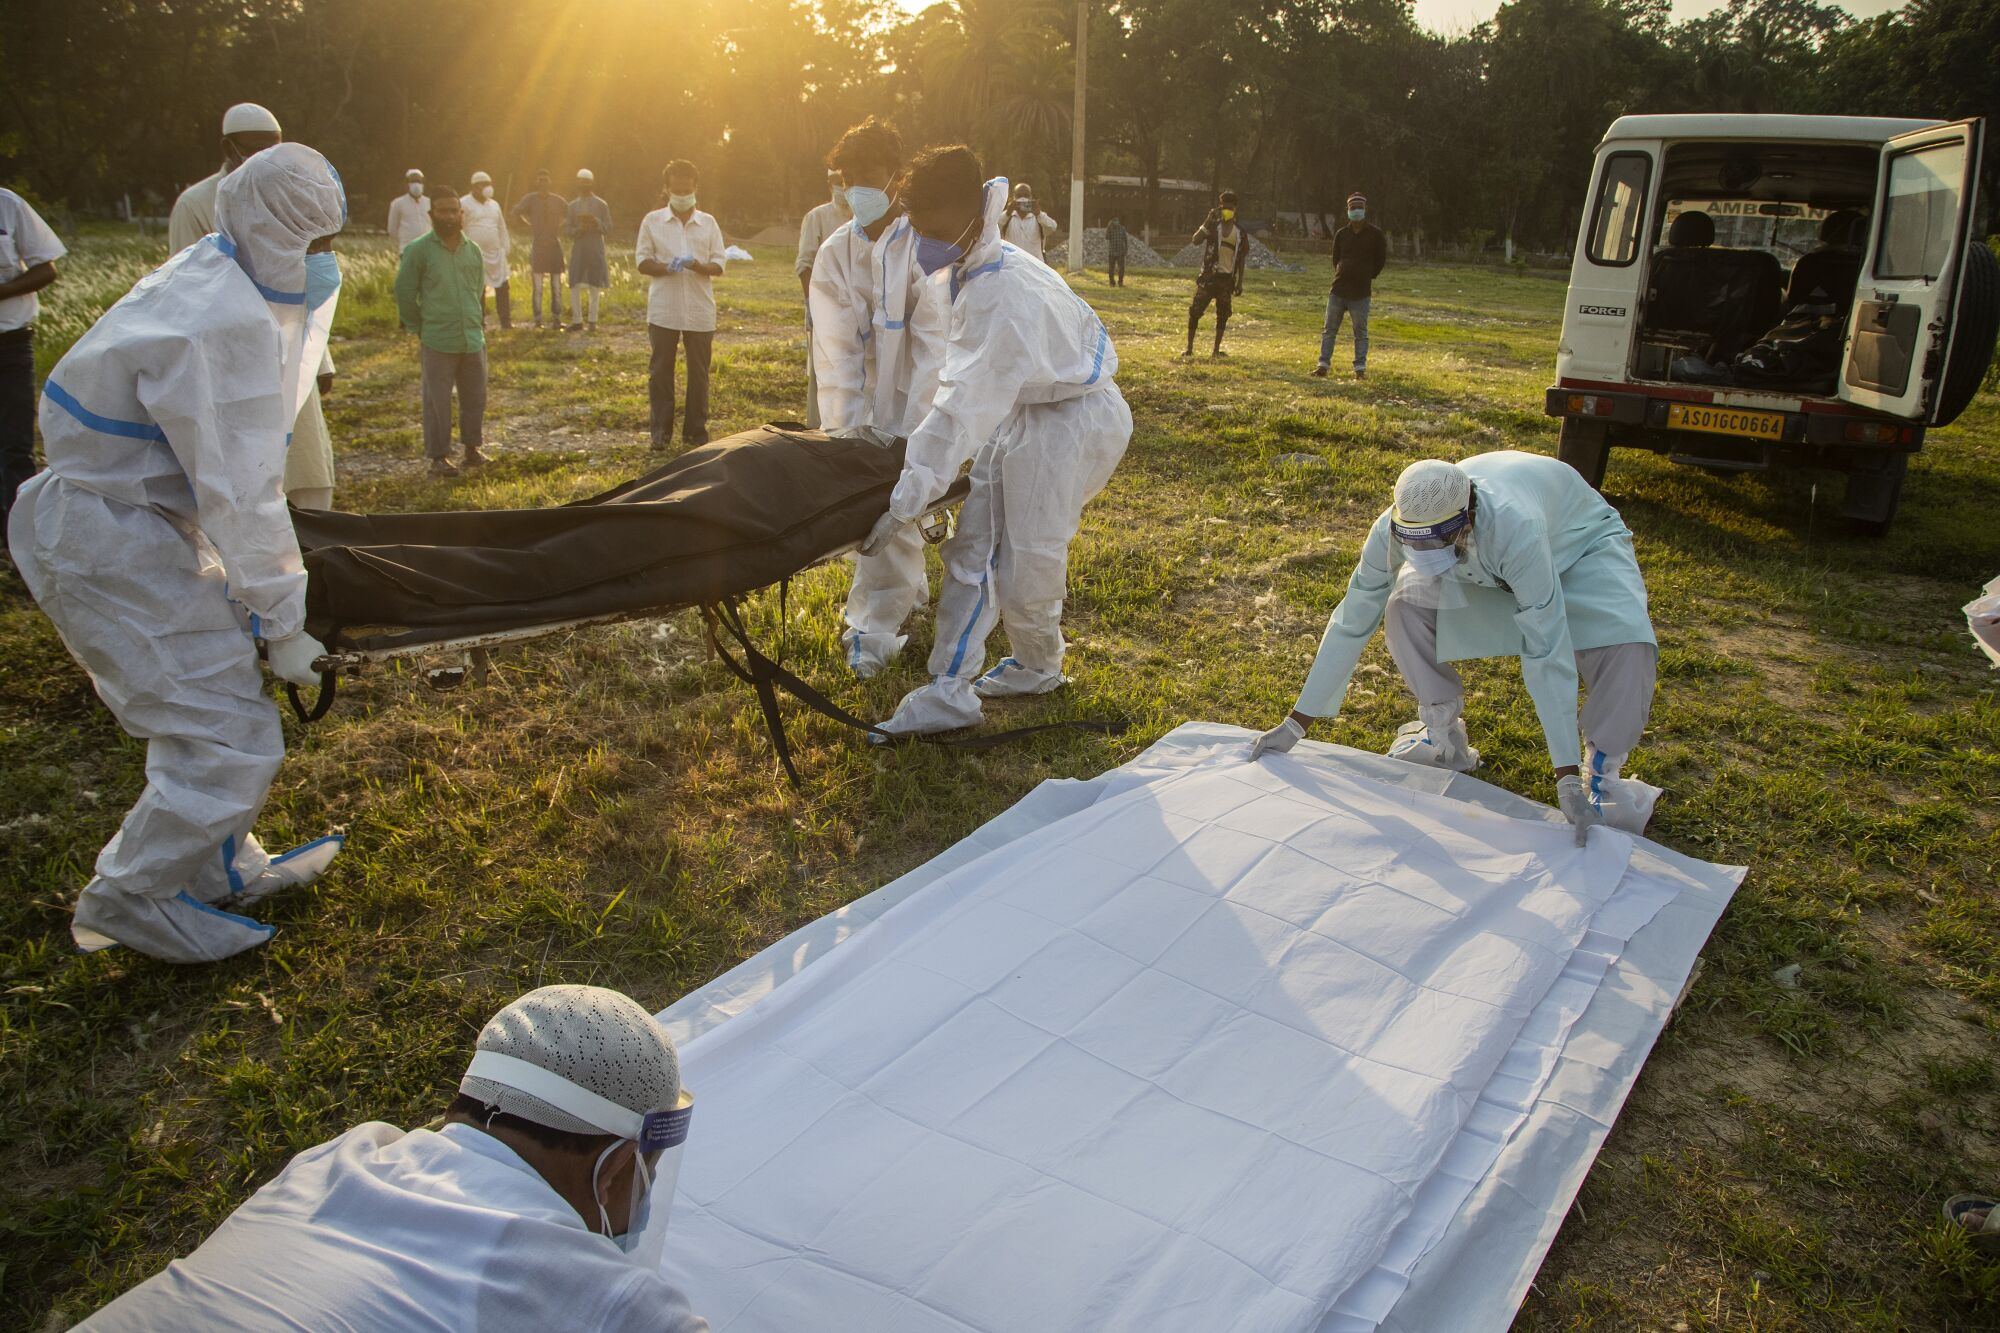 Workers in white protective suits, left, carry a black body bag. Two more workers lay out white sheets on the grass nearby.
